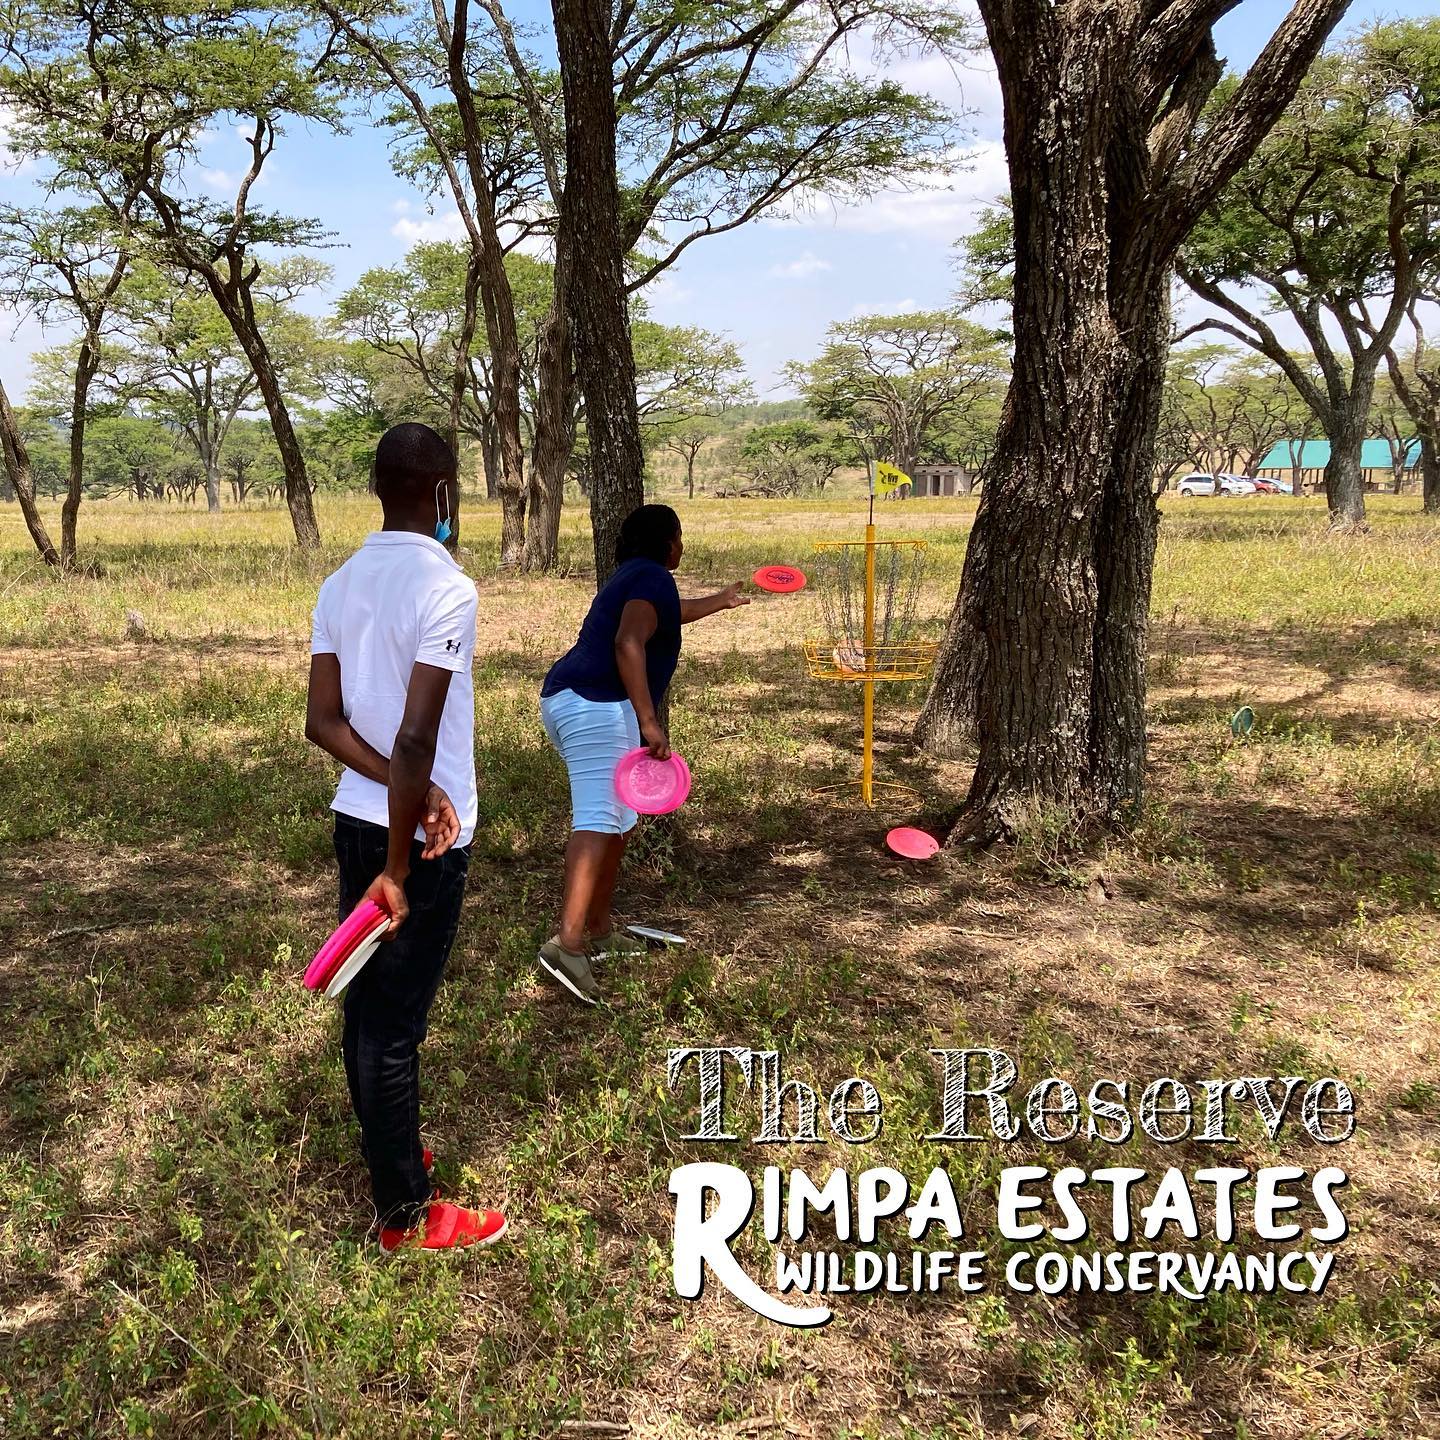 We’re excited to share the disc golf experience with you any time you picnic or camp with us. It’s a great way to enjoy the scenery and wildlife  here at The Reserve. 

#discgolfkenya #discgolf #discgolfafrica #kenyacamping #campinginkenya #nairobigetaway #nairobikenya #wildlifekenya #kenyawildlife #wildlifeconservation